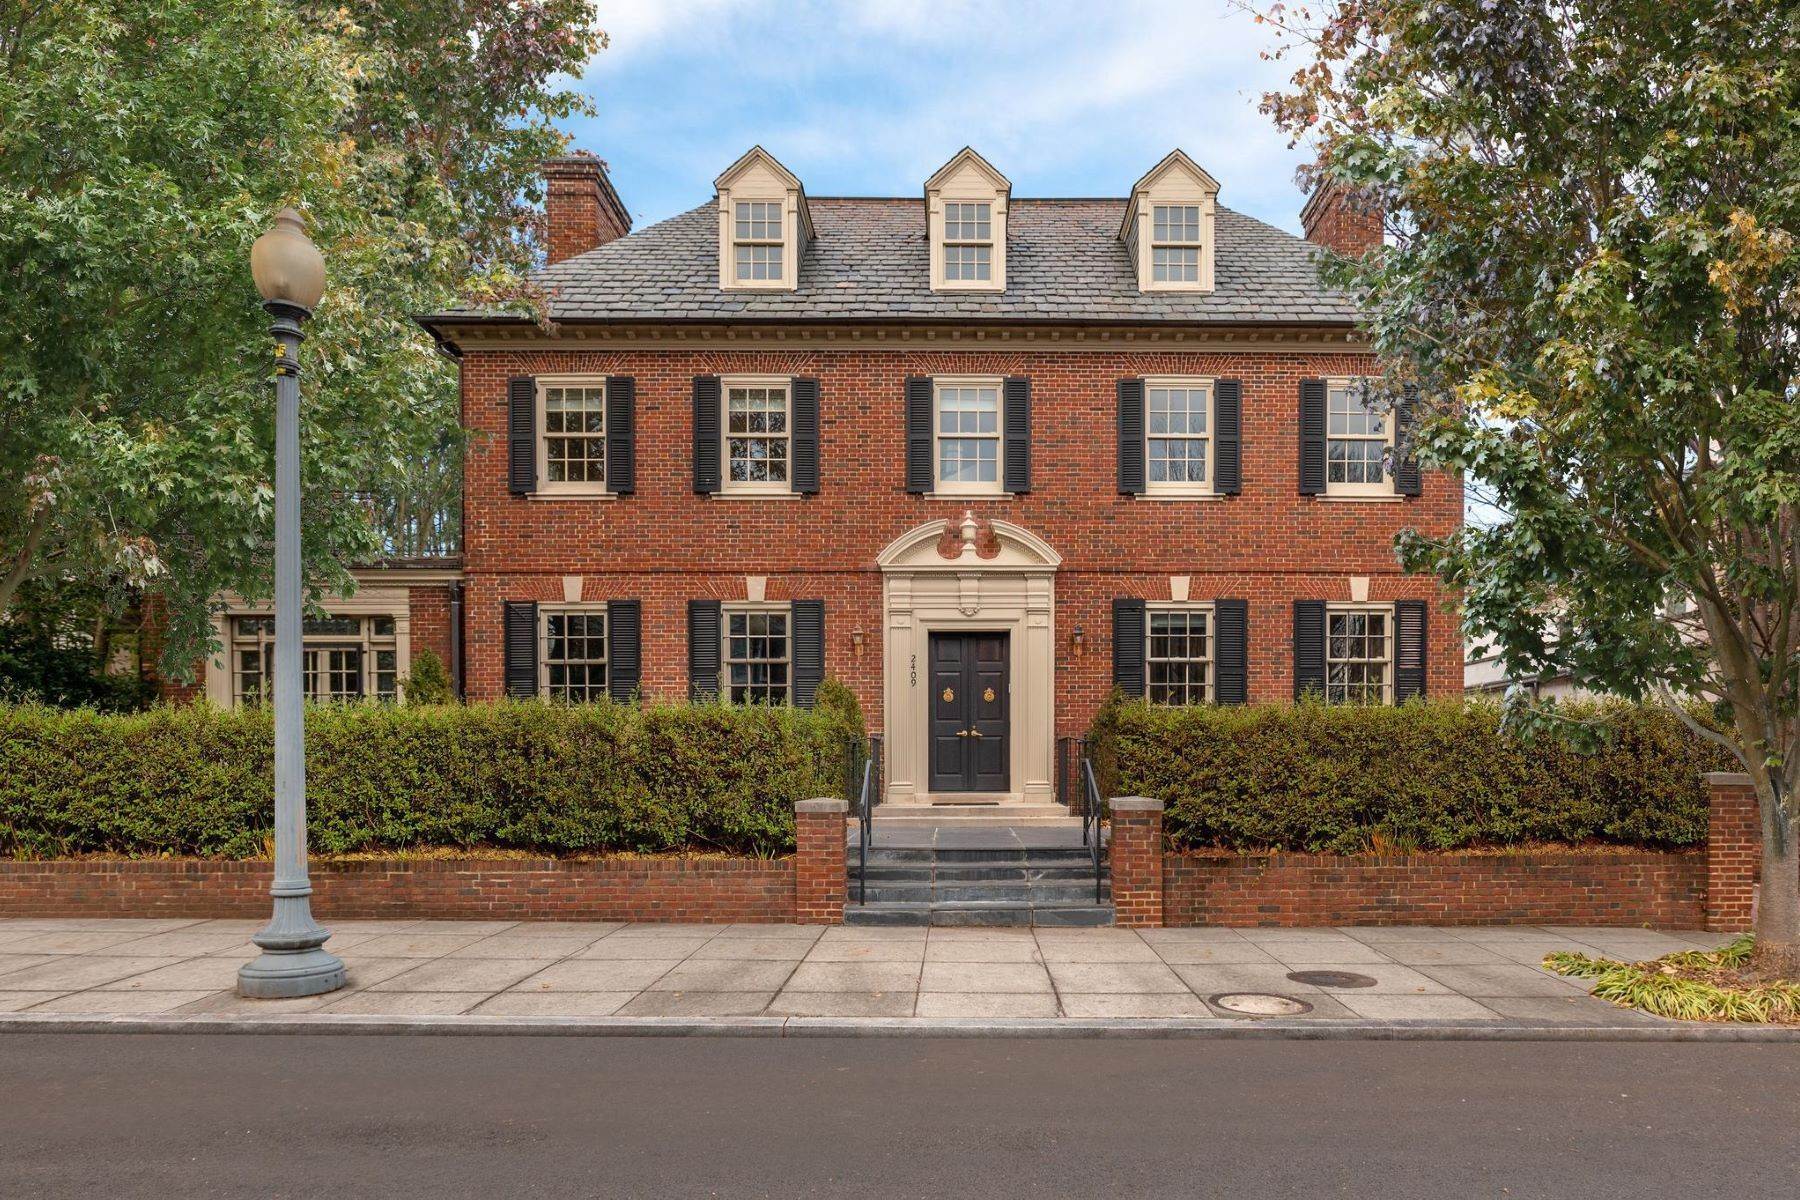 Single Family Homes for Sale at 2409 Wyoming Ave Nw Washington, District Of Columbia 20008 United States